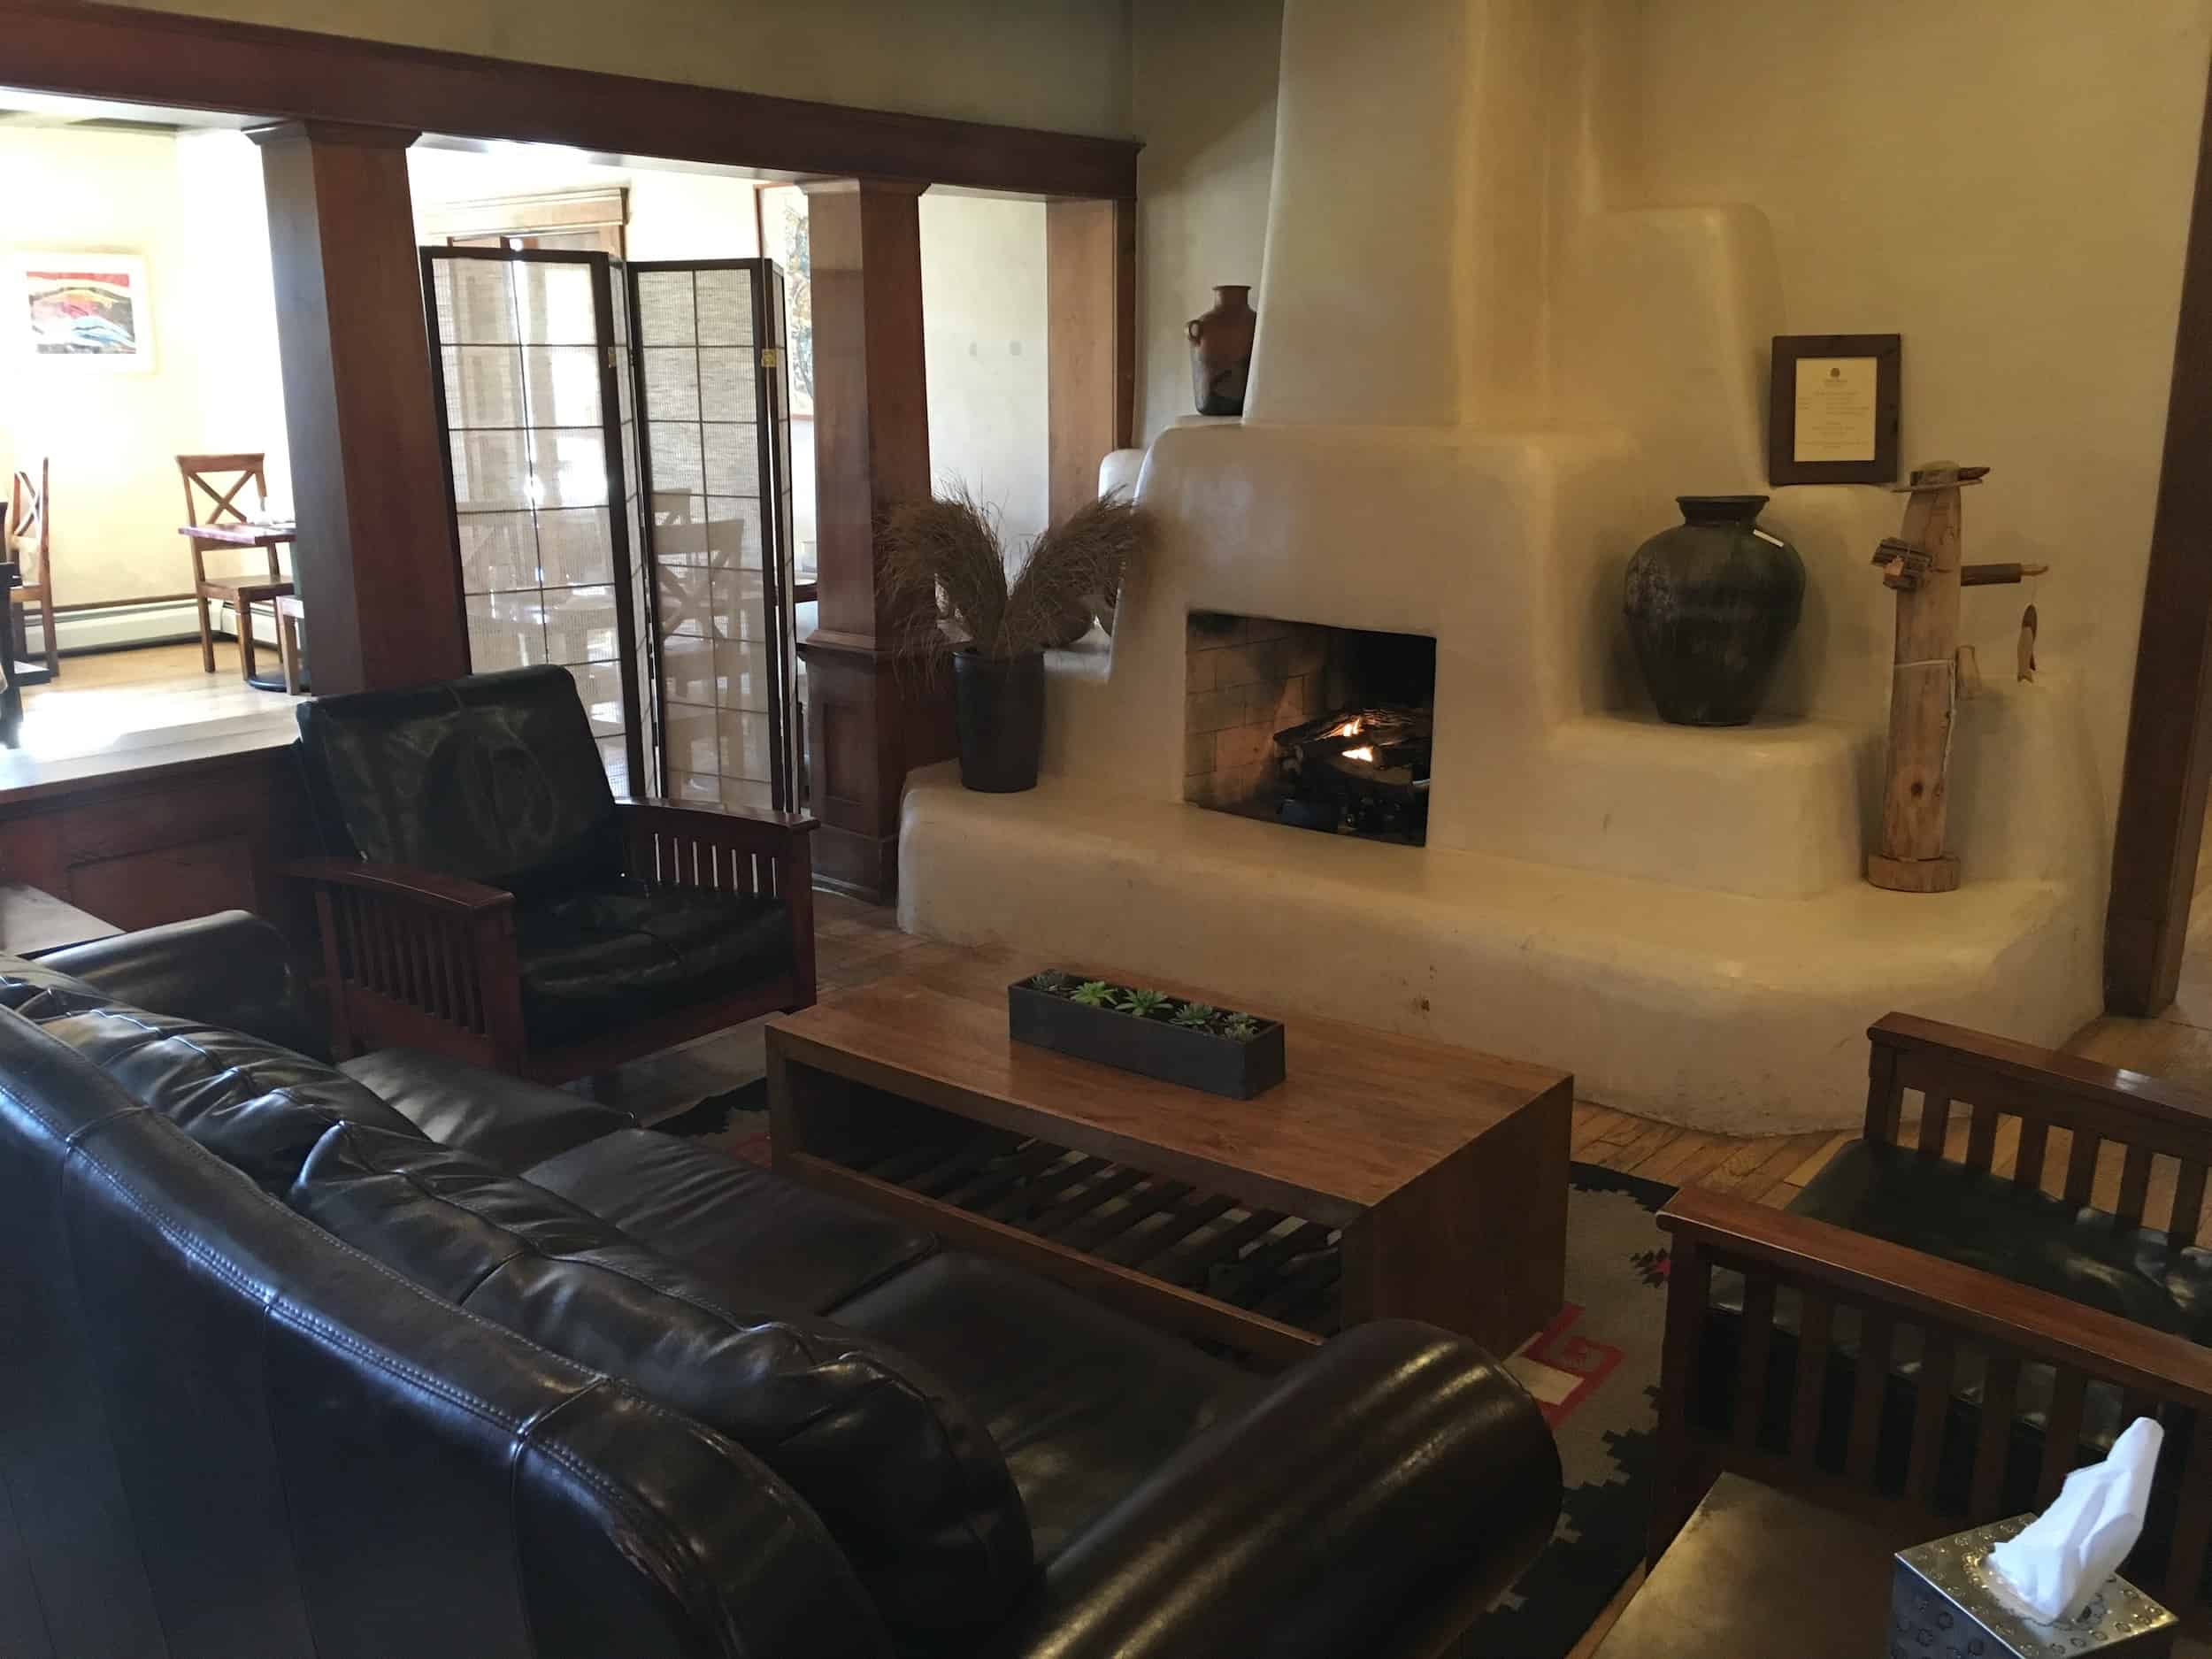 Sitting area at Ojo Caliente Mineral Springs Resort and Spa in Ojo Caliente, New Mexico